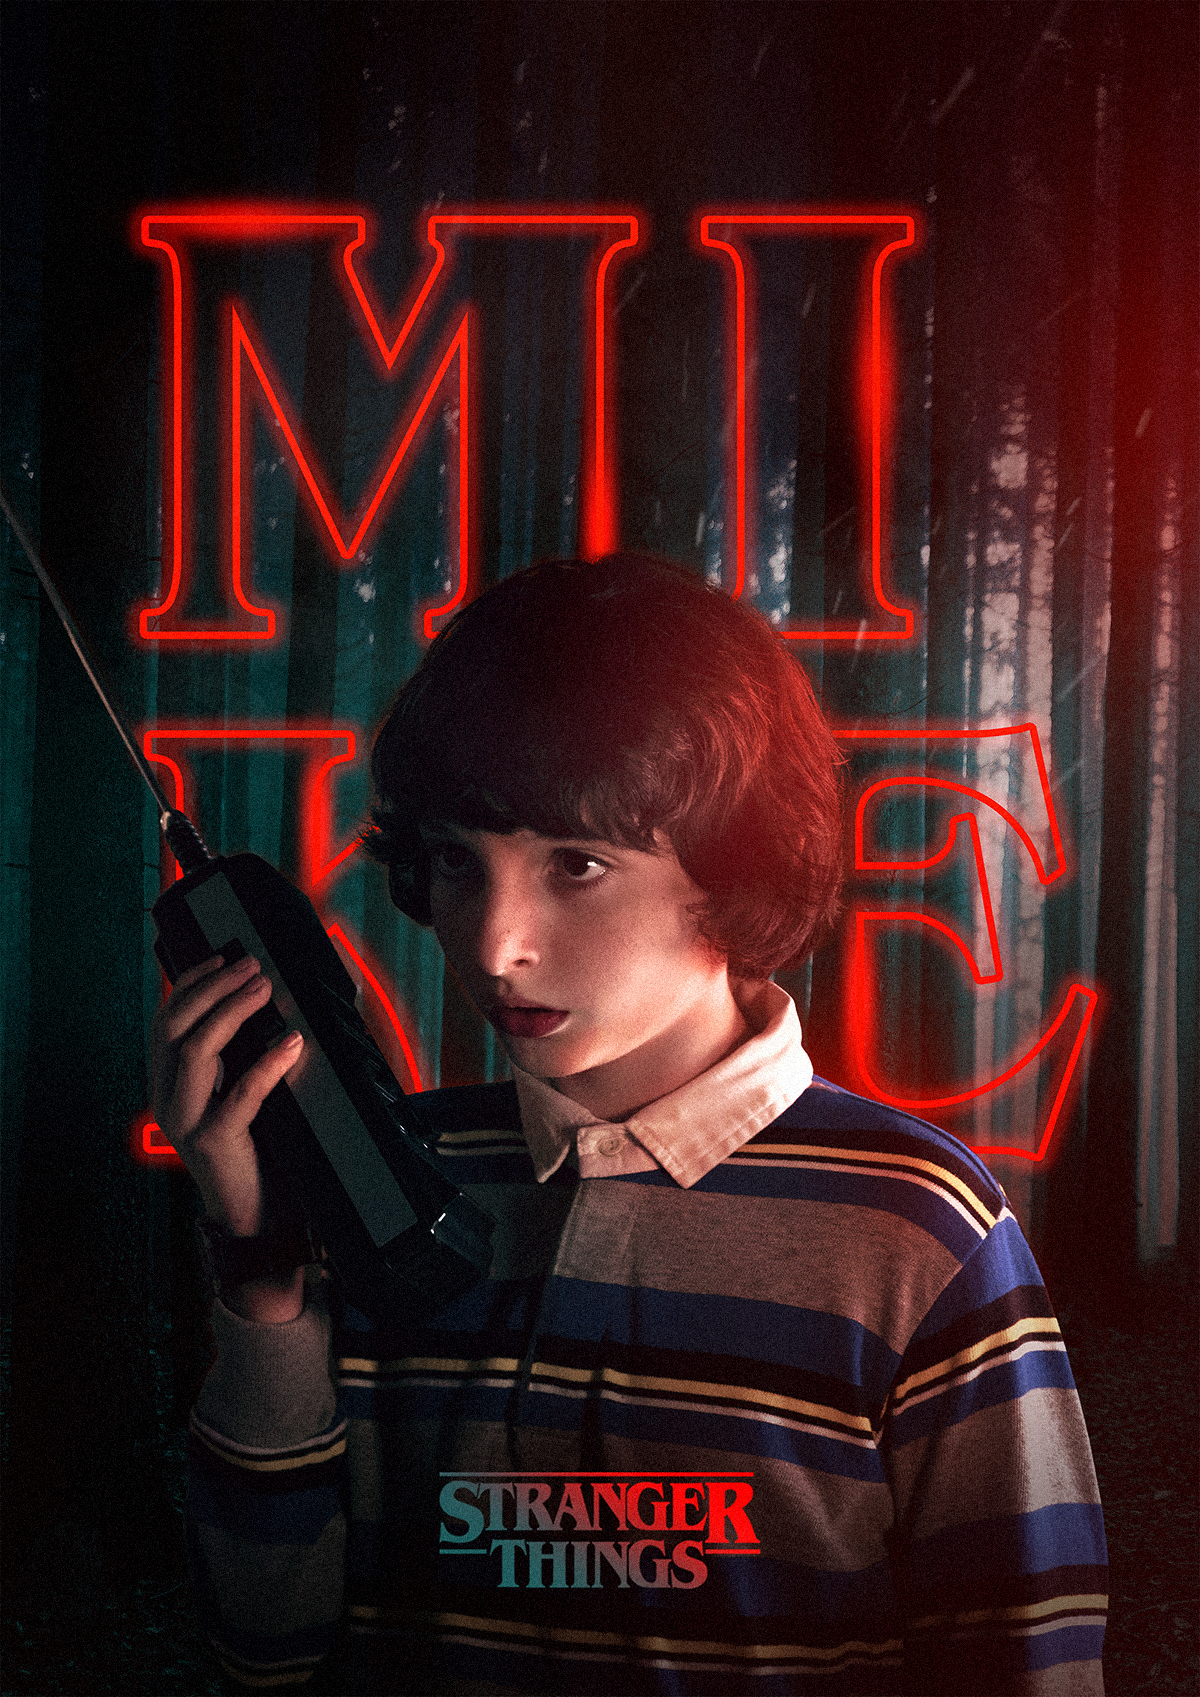 Rigved Sathe Stranger Things Posters (4)